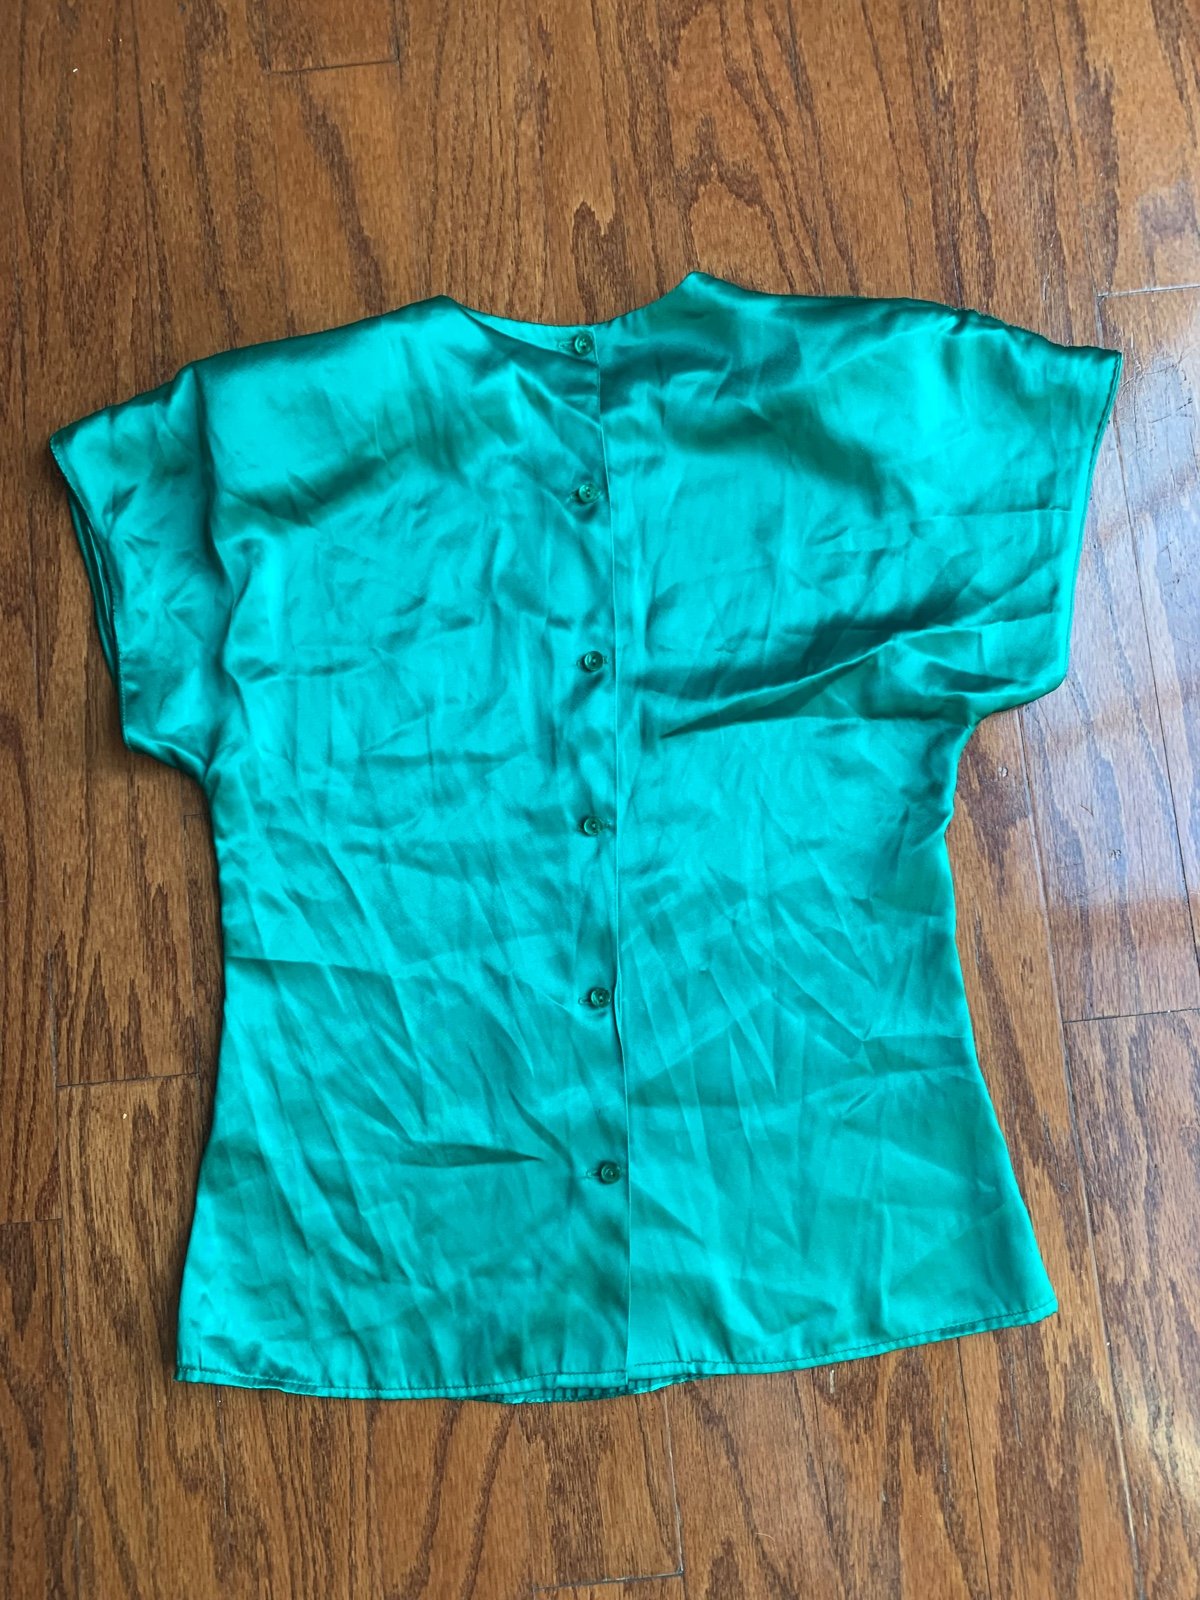 good price San Andre Green Back Button Down Blouse Size 4 fJClxCDZs online store